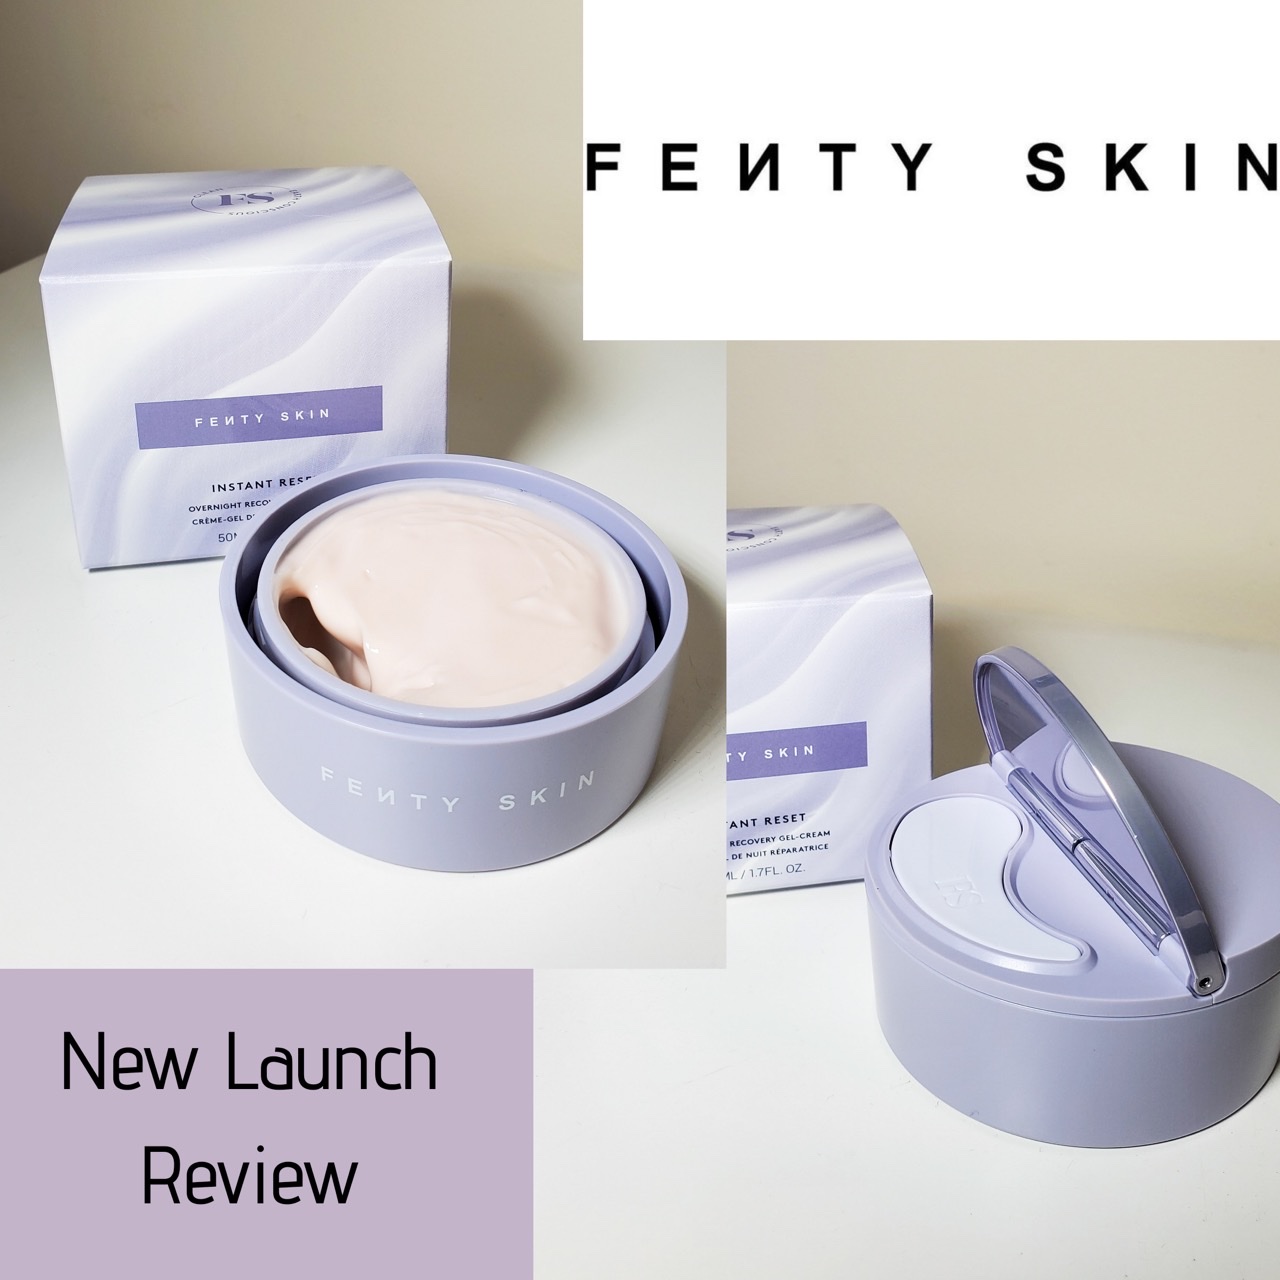 Let’s Review Fenty Skin again…Another flop or miracle Moisturizer?